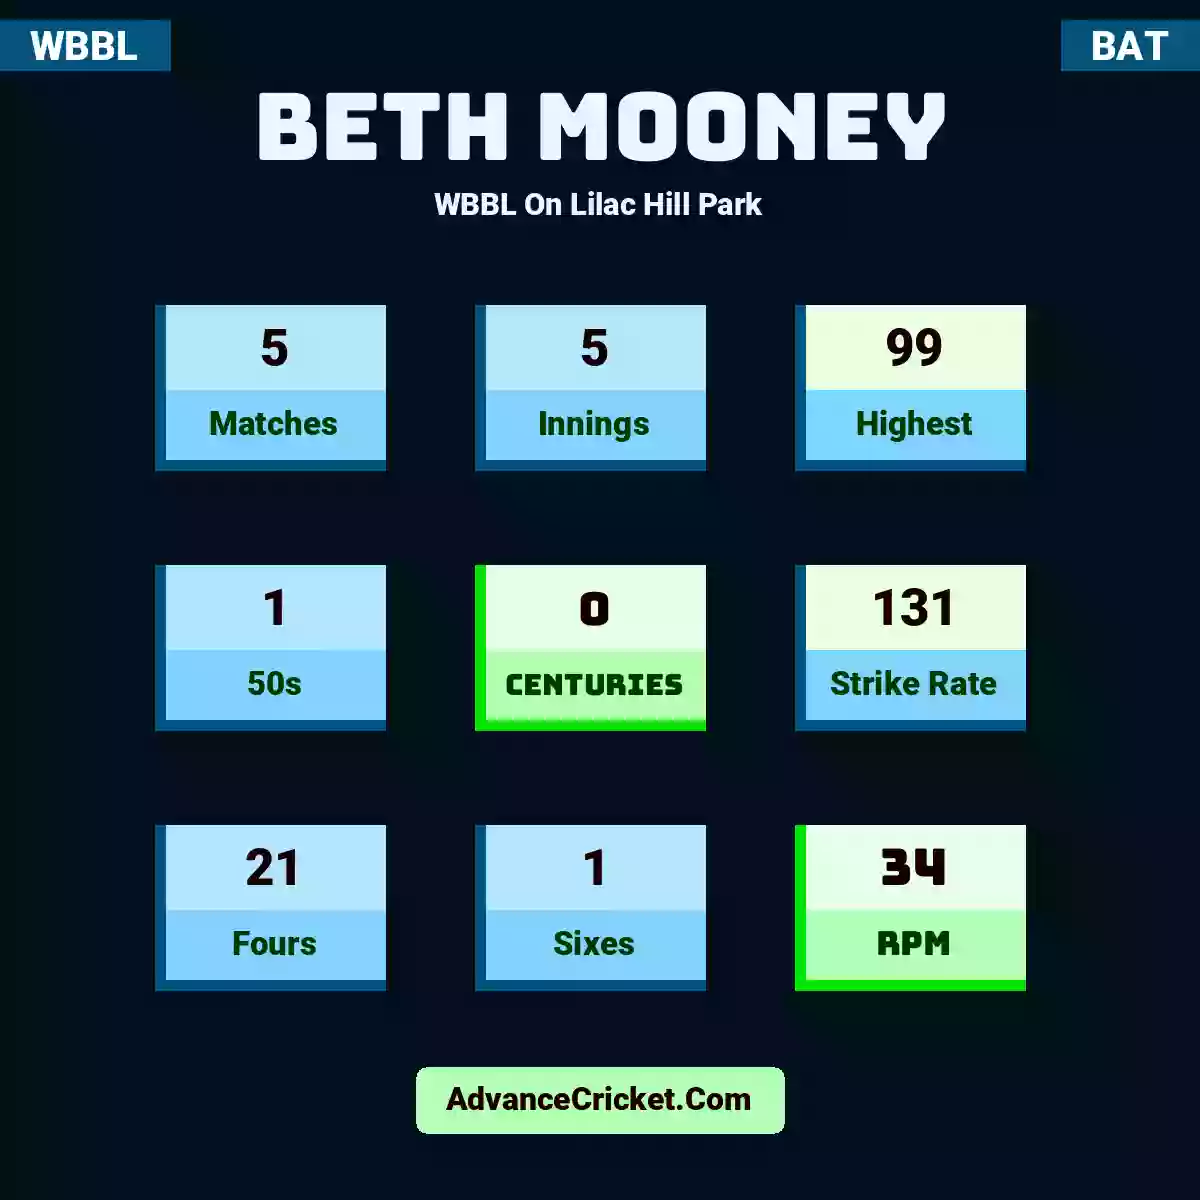 Beth Mooney WBBL  On Lilac Hill Park, Beth Mooney played 5 matches, scored 99 runs as highest, 1 half-centuries, and 0 centuries, with a strike rate of 131. B.Mooney hit 21 fours and 1 sixes, with an RPM of 34.